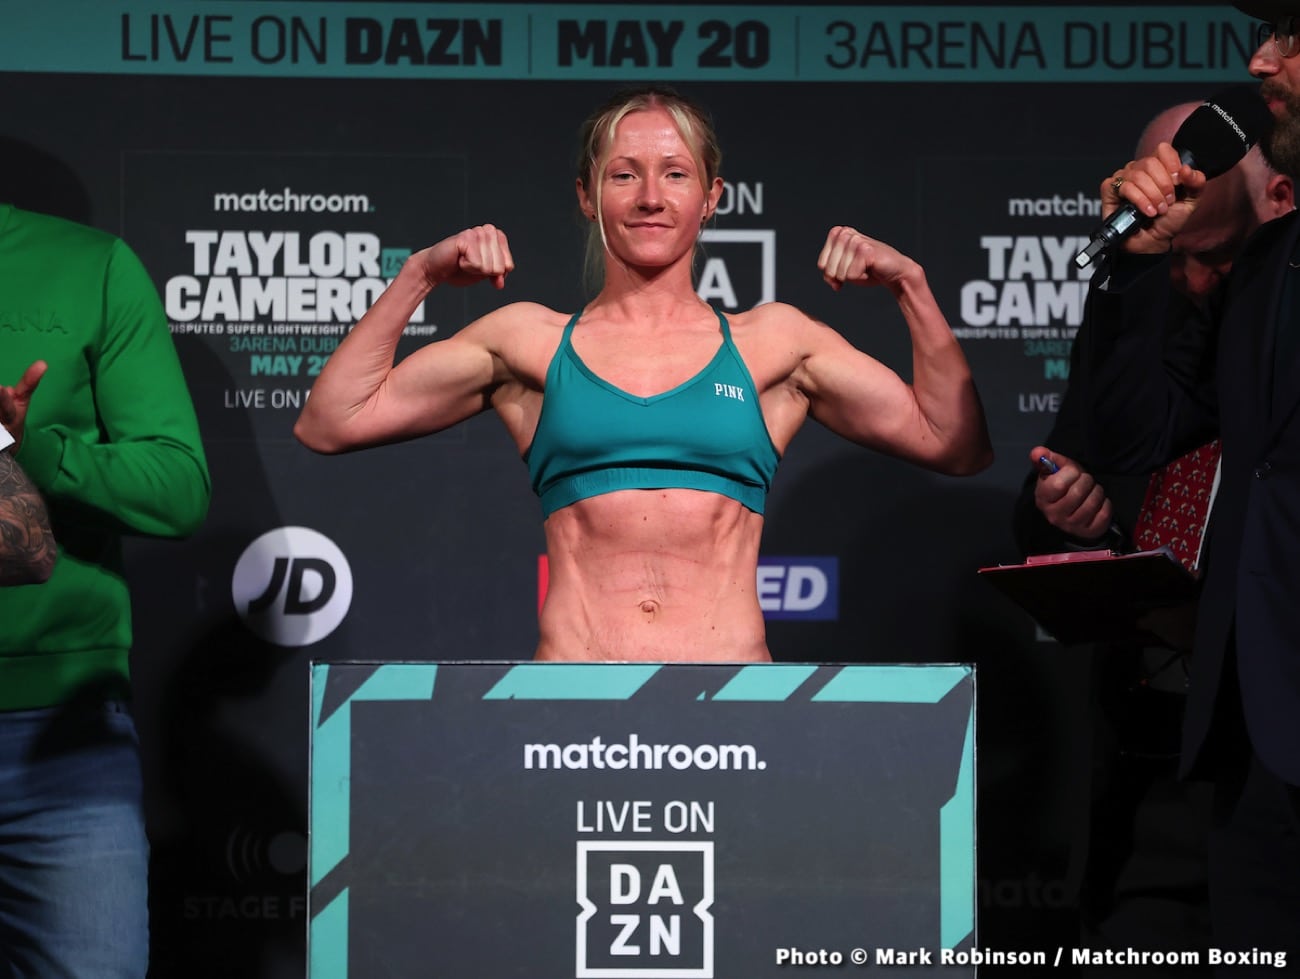 Image: Katie Taylor vs Cameron Tonight: Start Time, Undercard & Live Stream Info